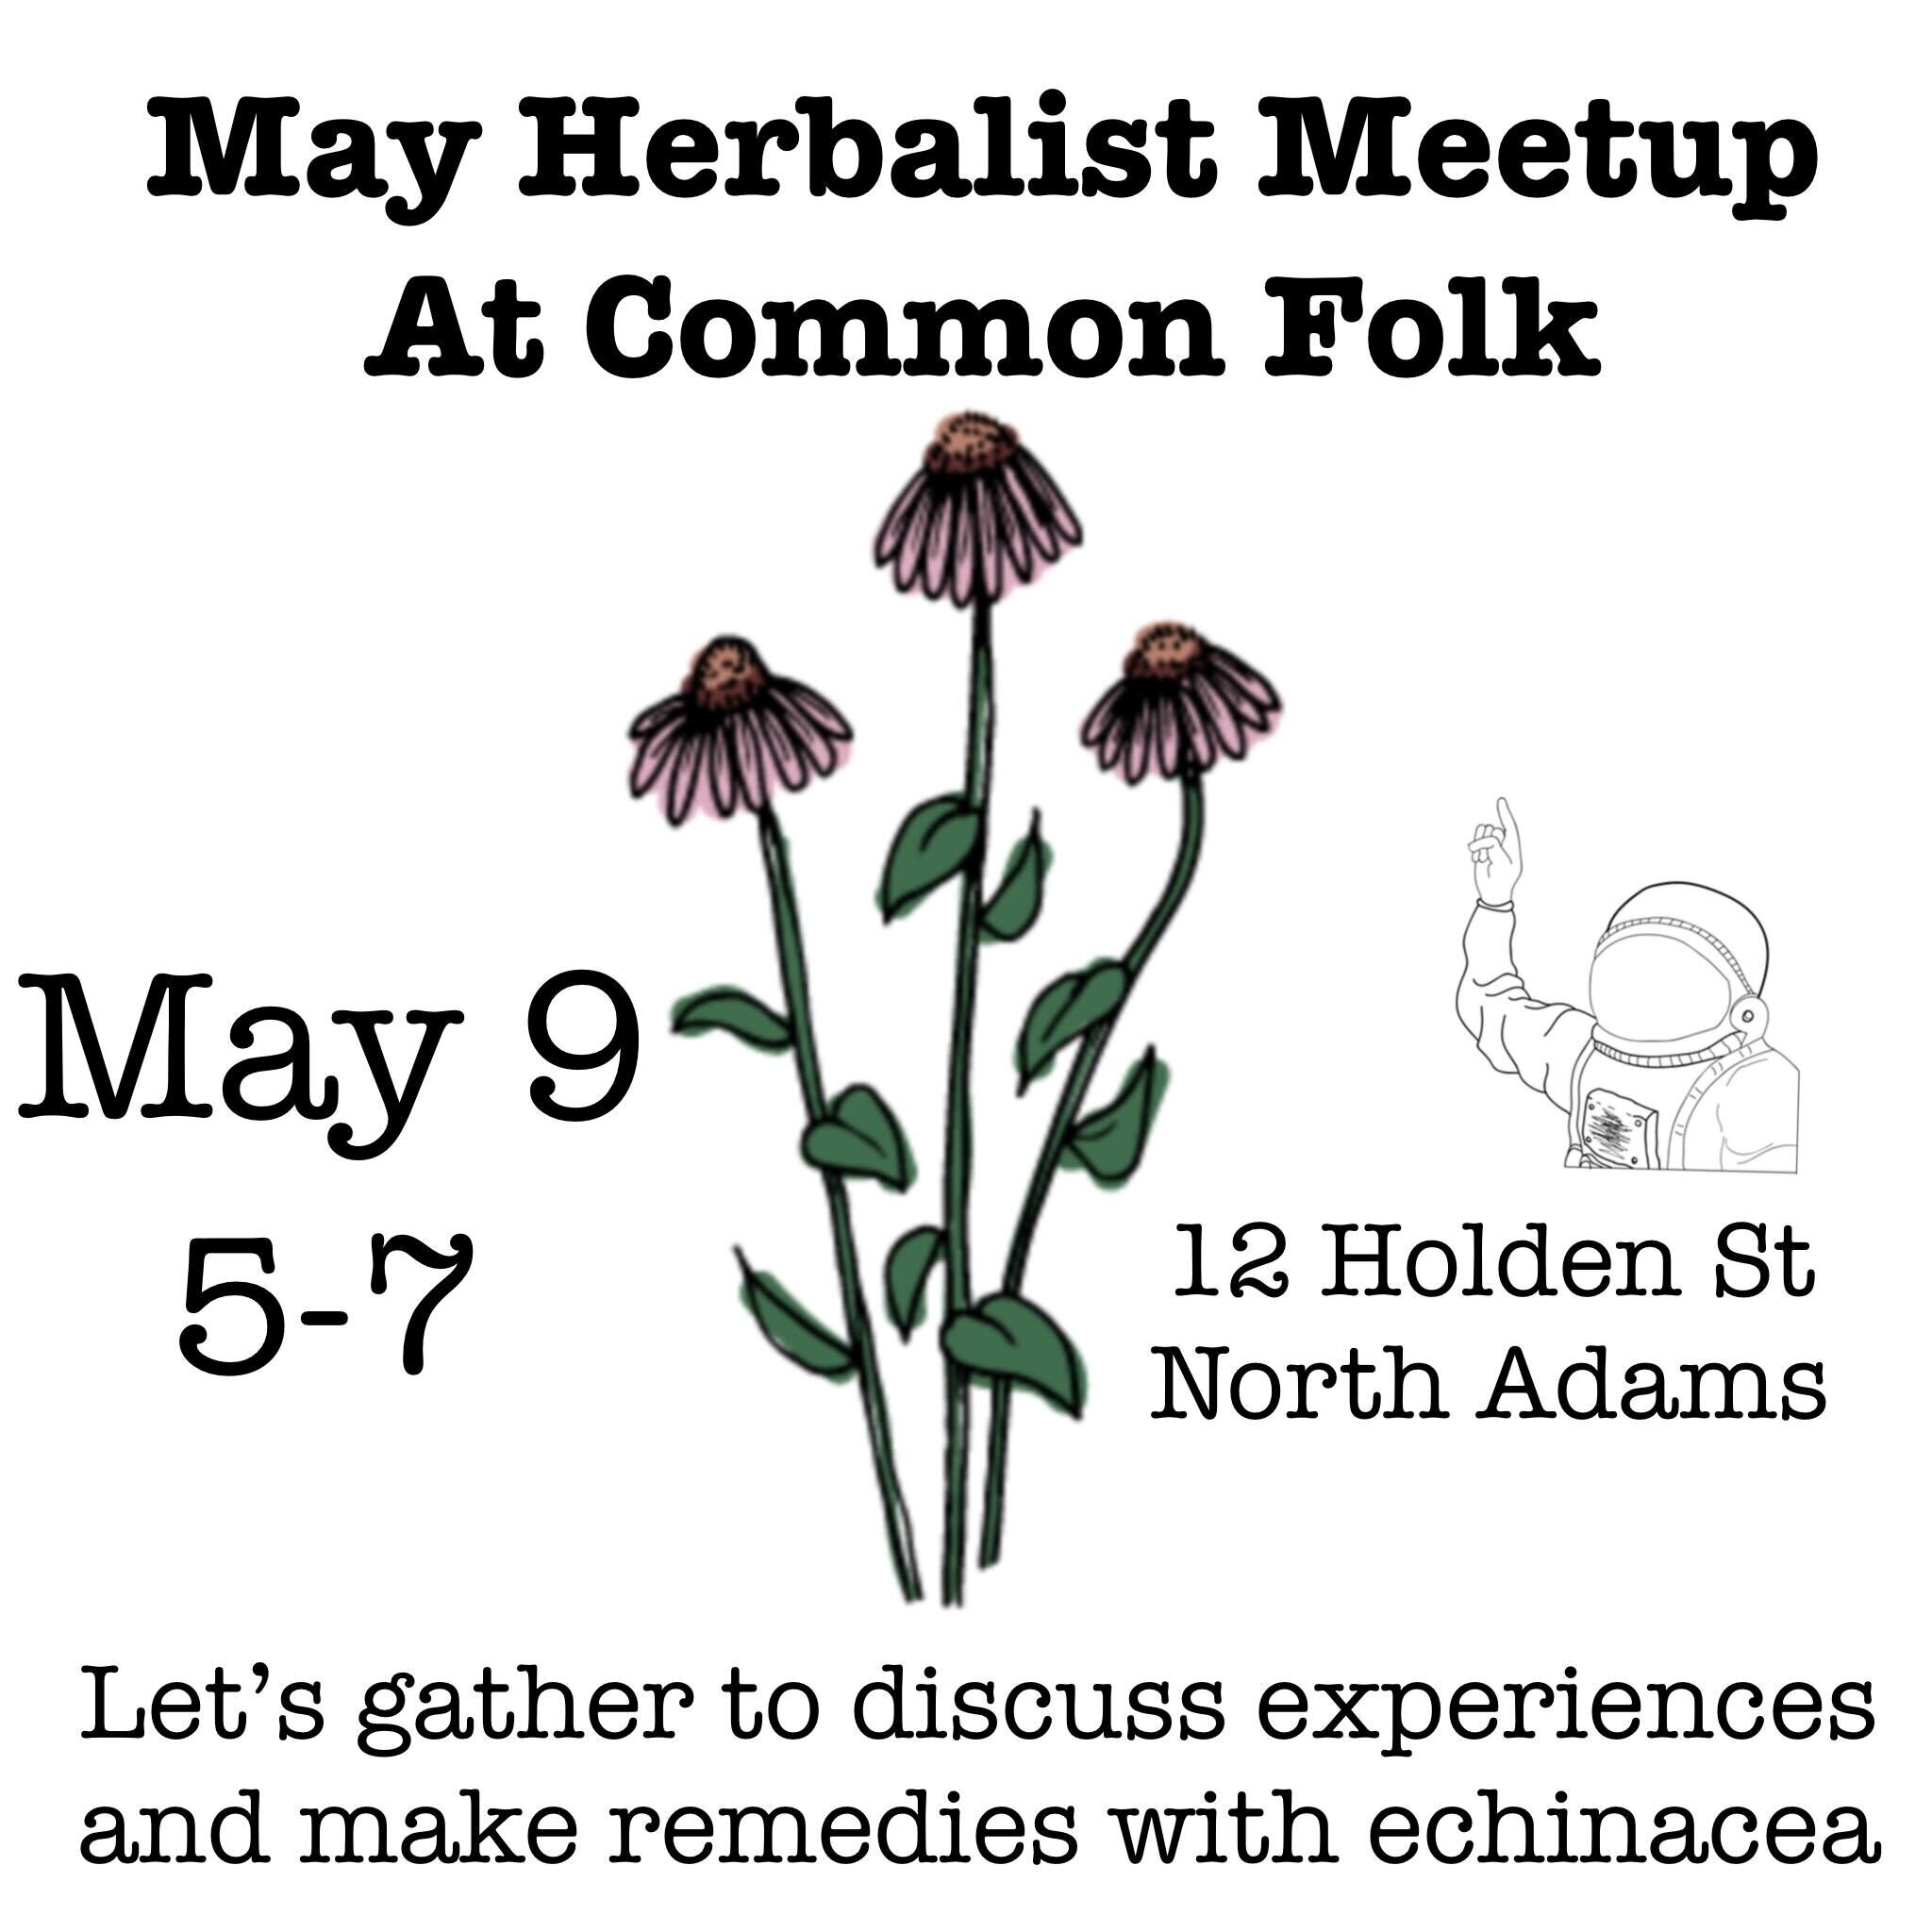 Warm weather is here! The Herbalist Meetup is back at Common Folk tomorrow, Tuesday May 9! Let's gather to discuss experiences and make remedies with echinacea. 

Echinacea can be used to fight colds and infections as well as topical wounds and skin 